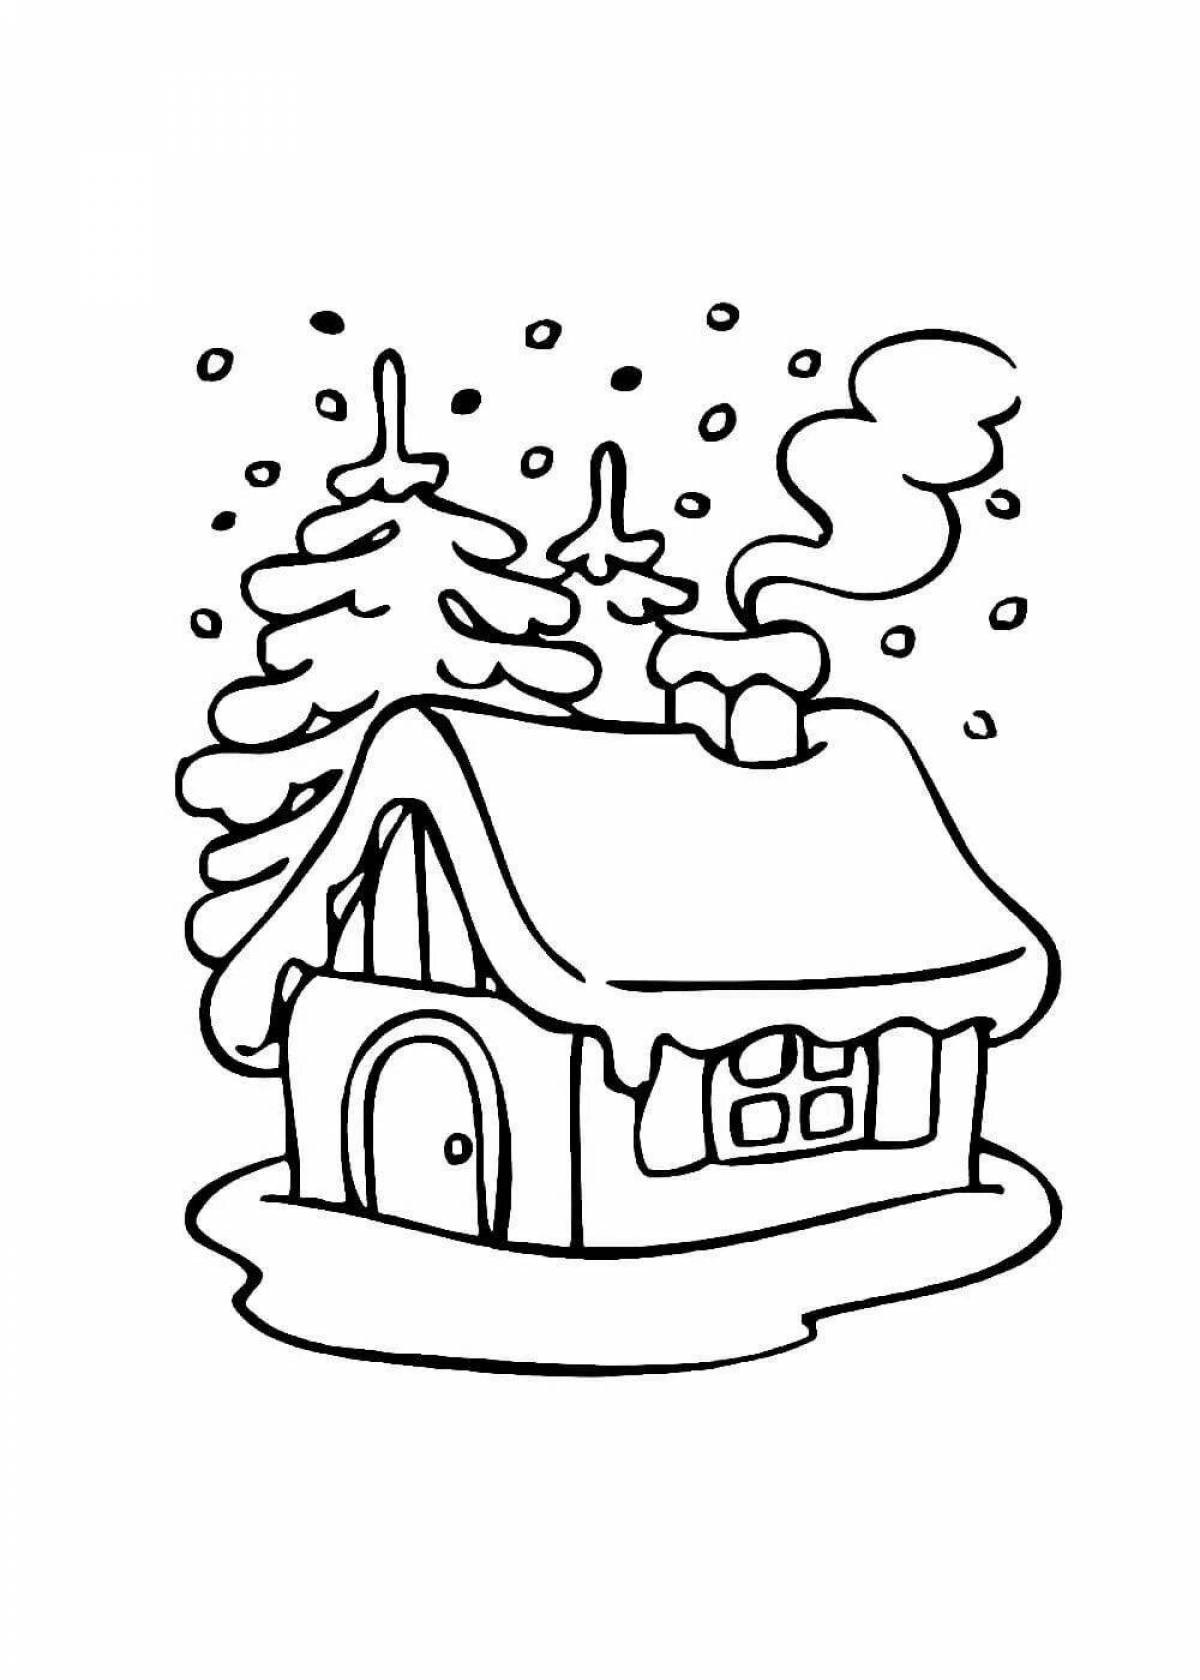 Fancy winter hut coloring page